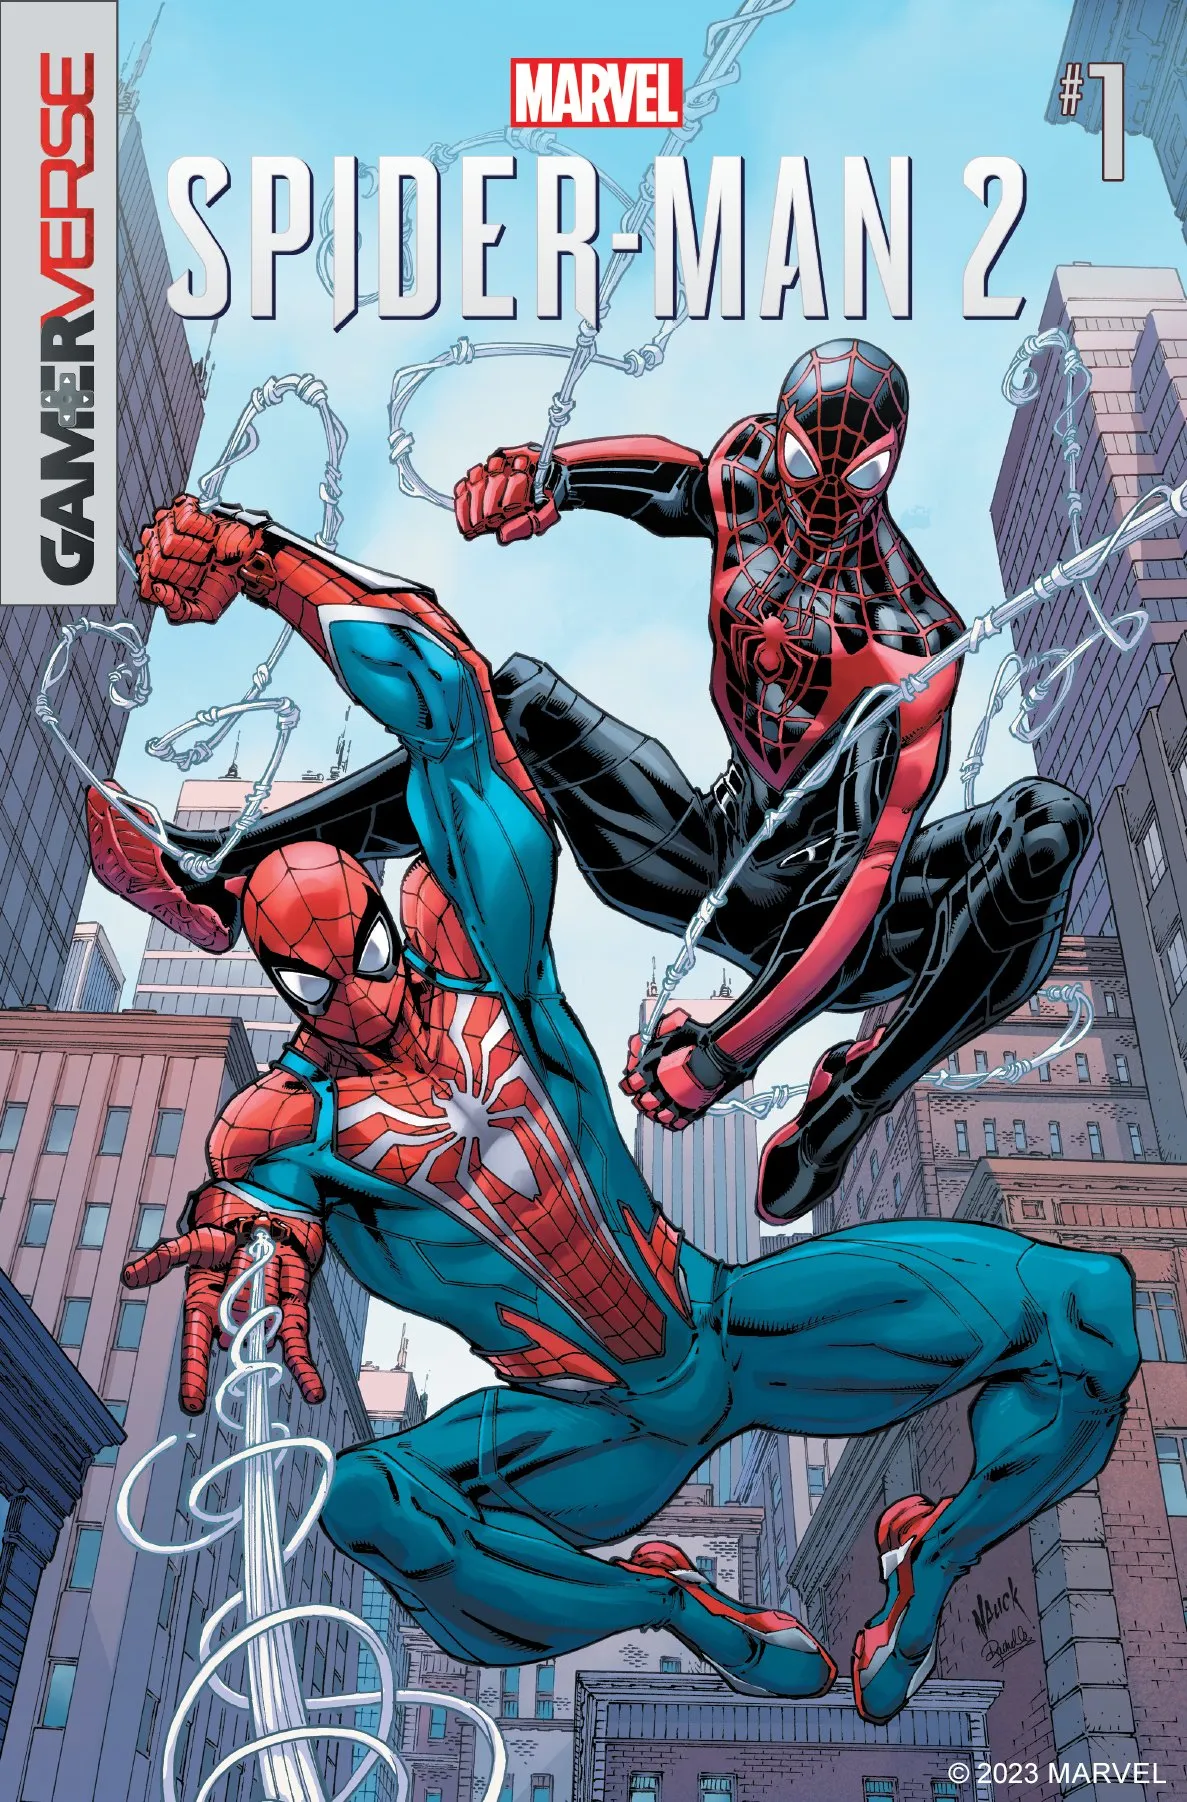 Marvel’s Spider-Man 2 Comic Appearing on Free Comic Book Day